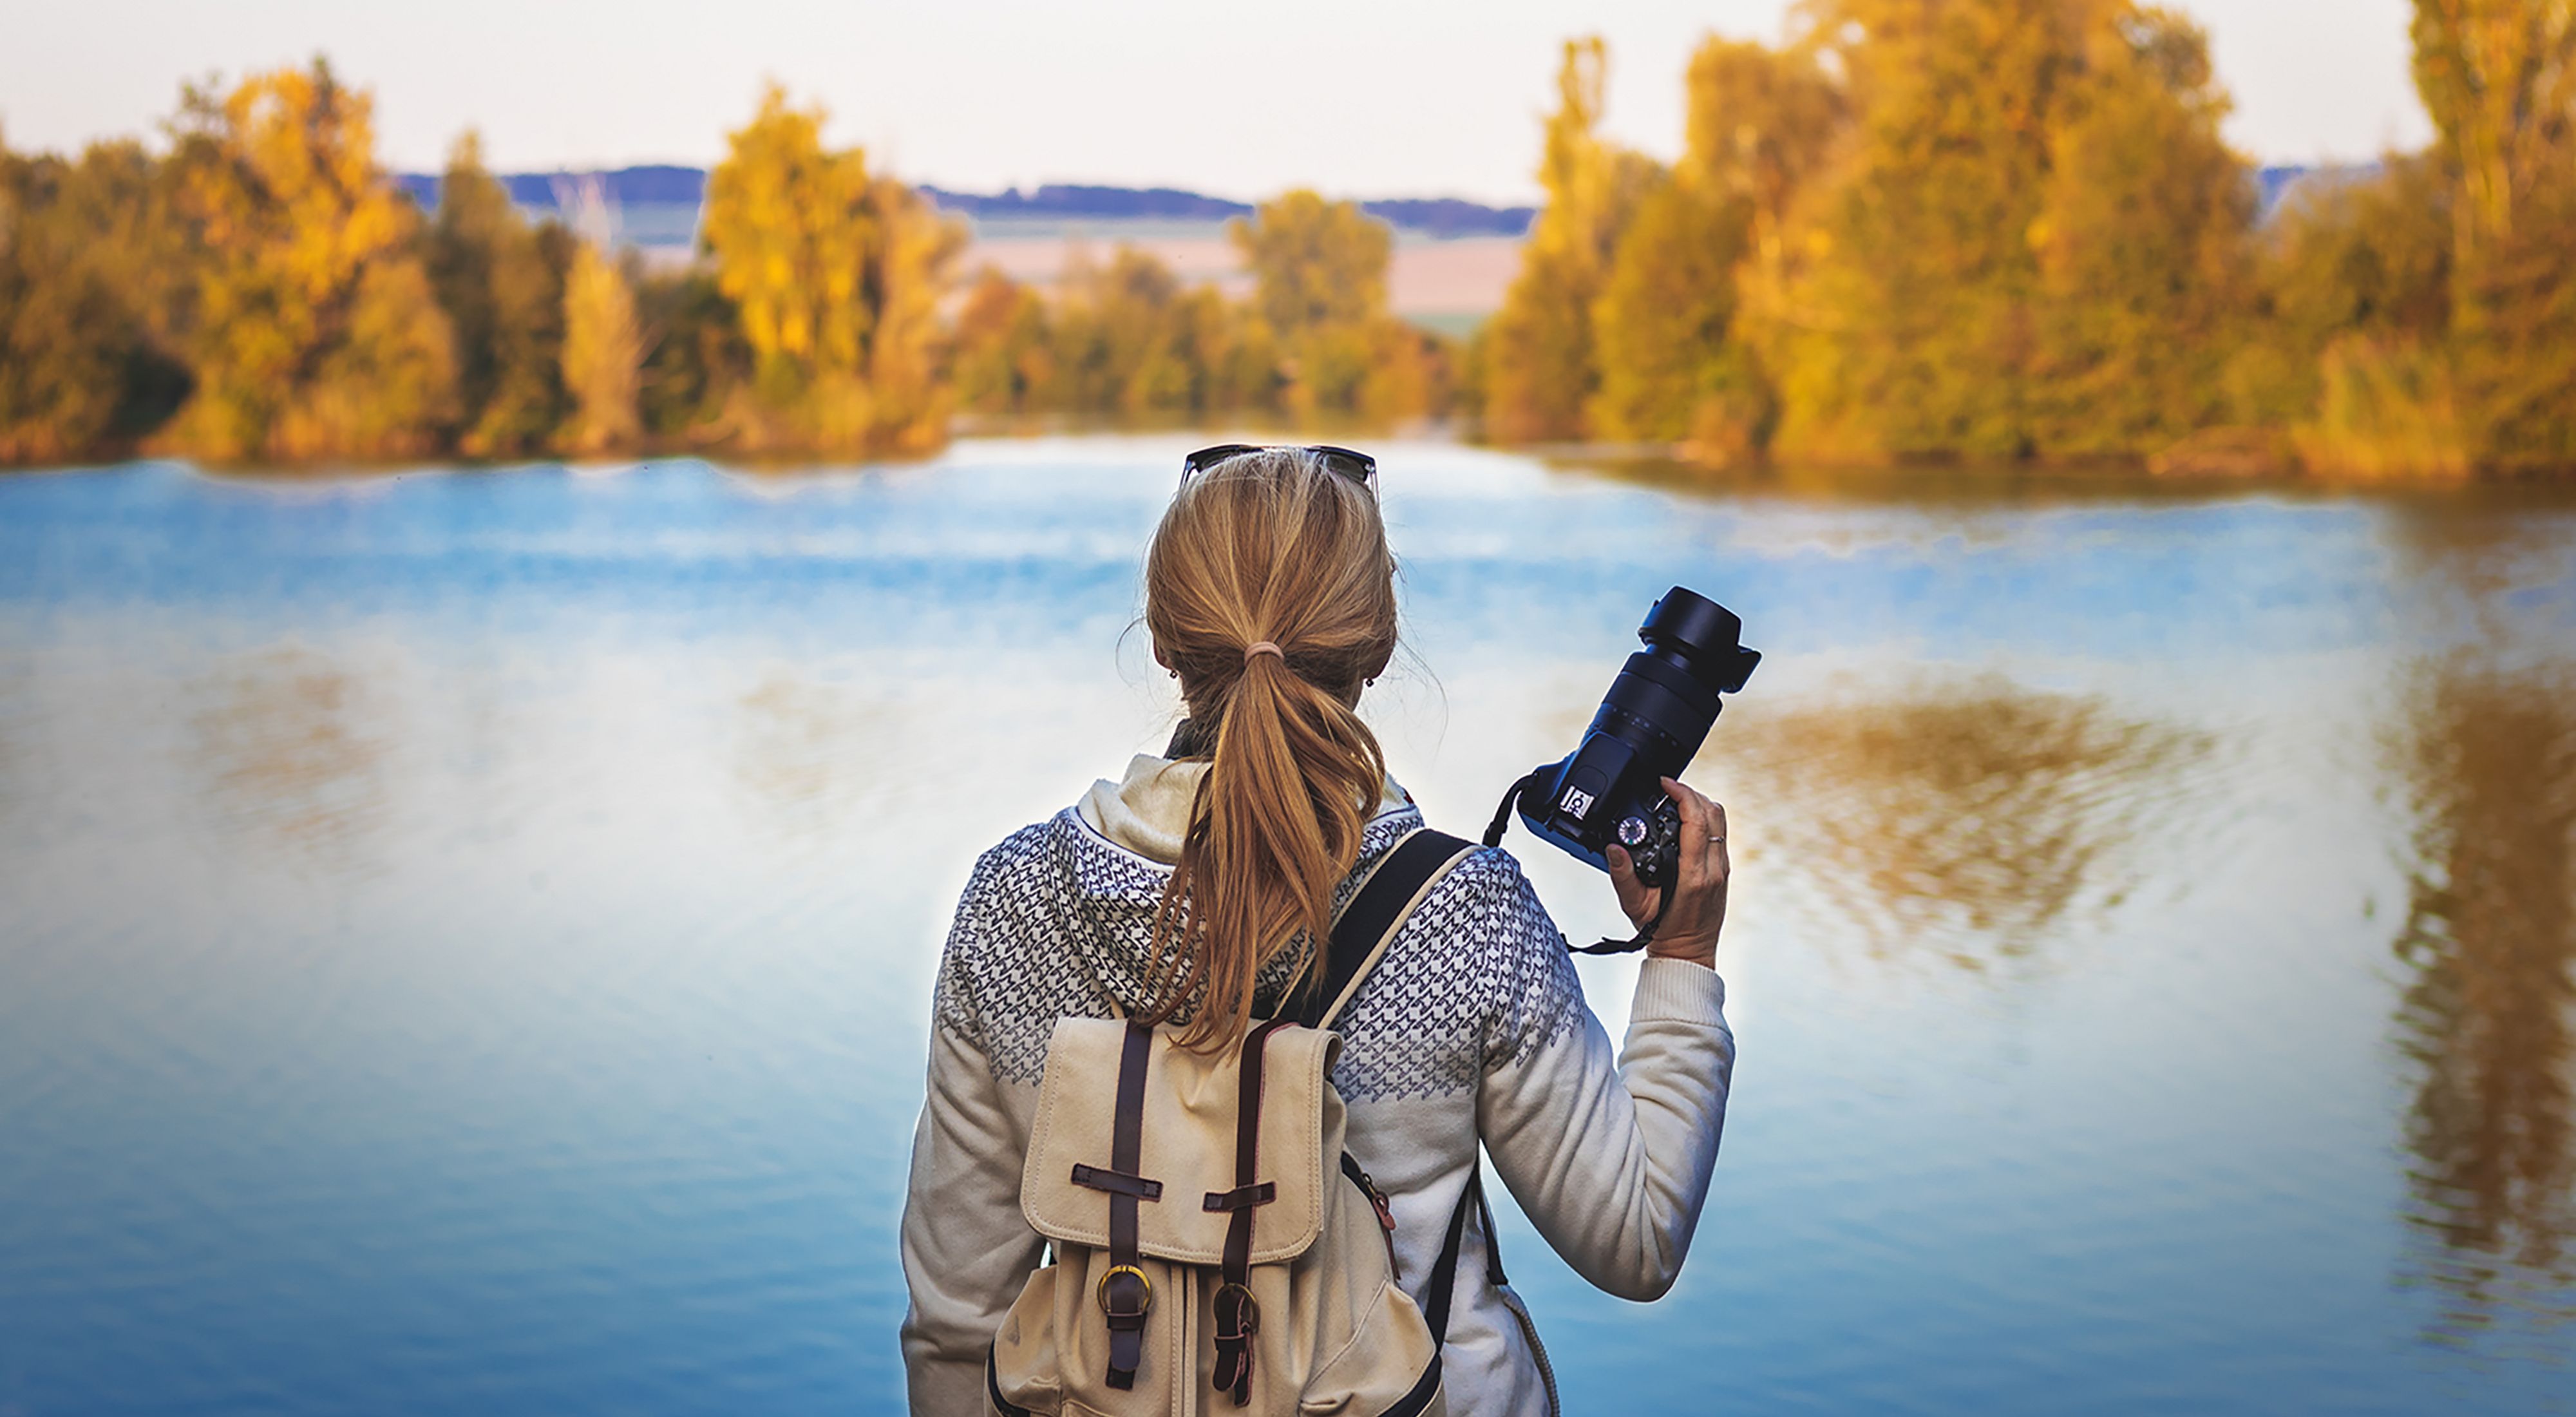 A person who is holding a camera looks out on a still lake that is surrounded by green trees. 